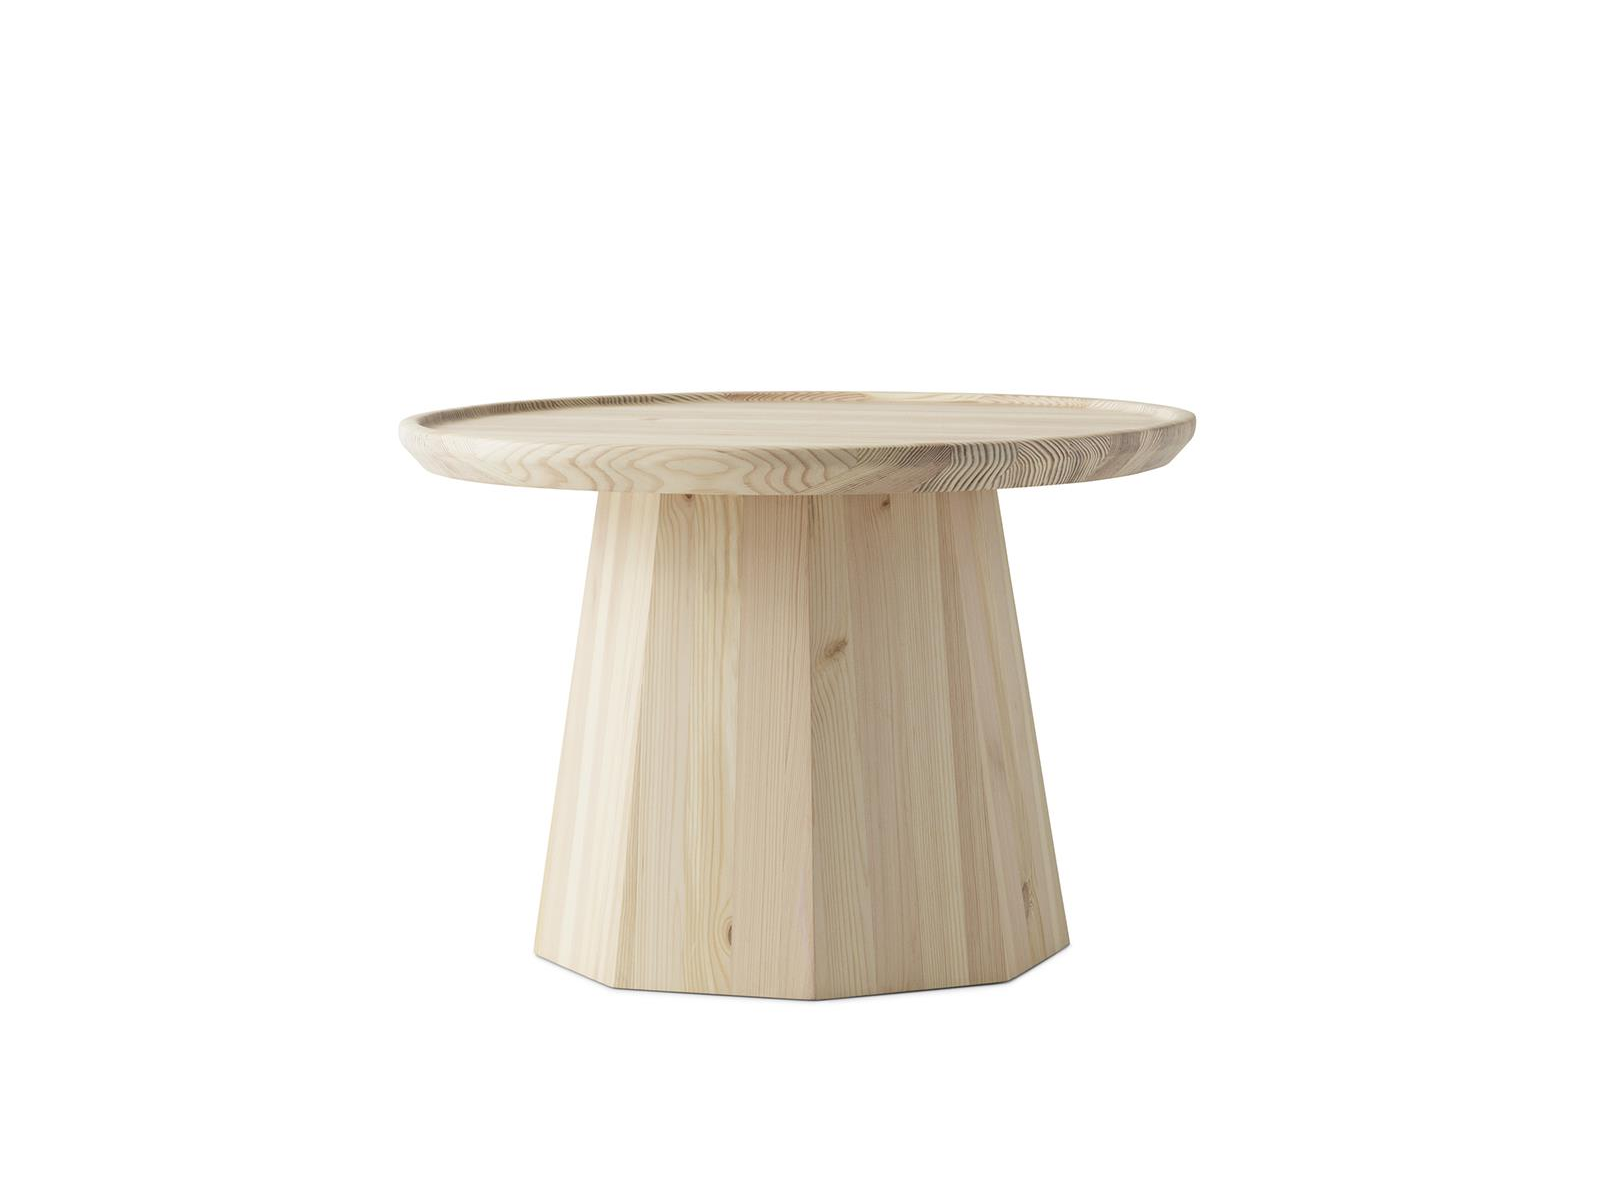 PINE TABLE